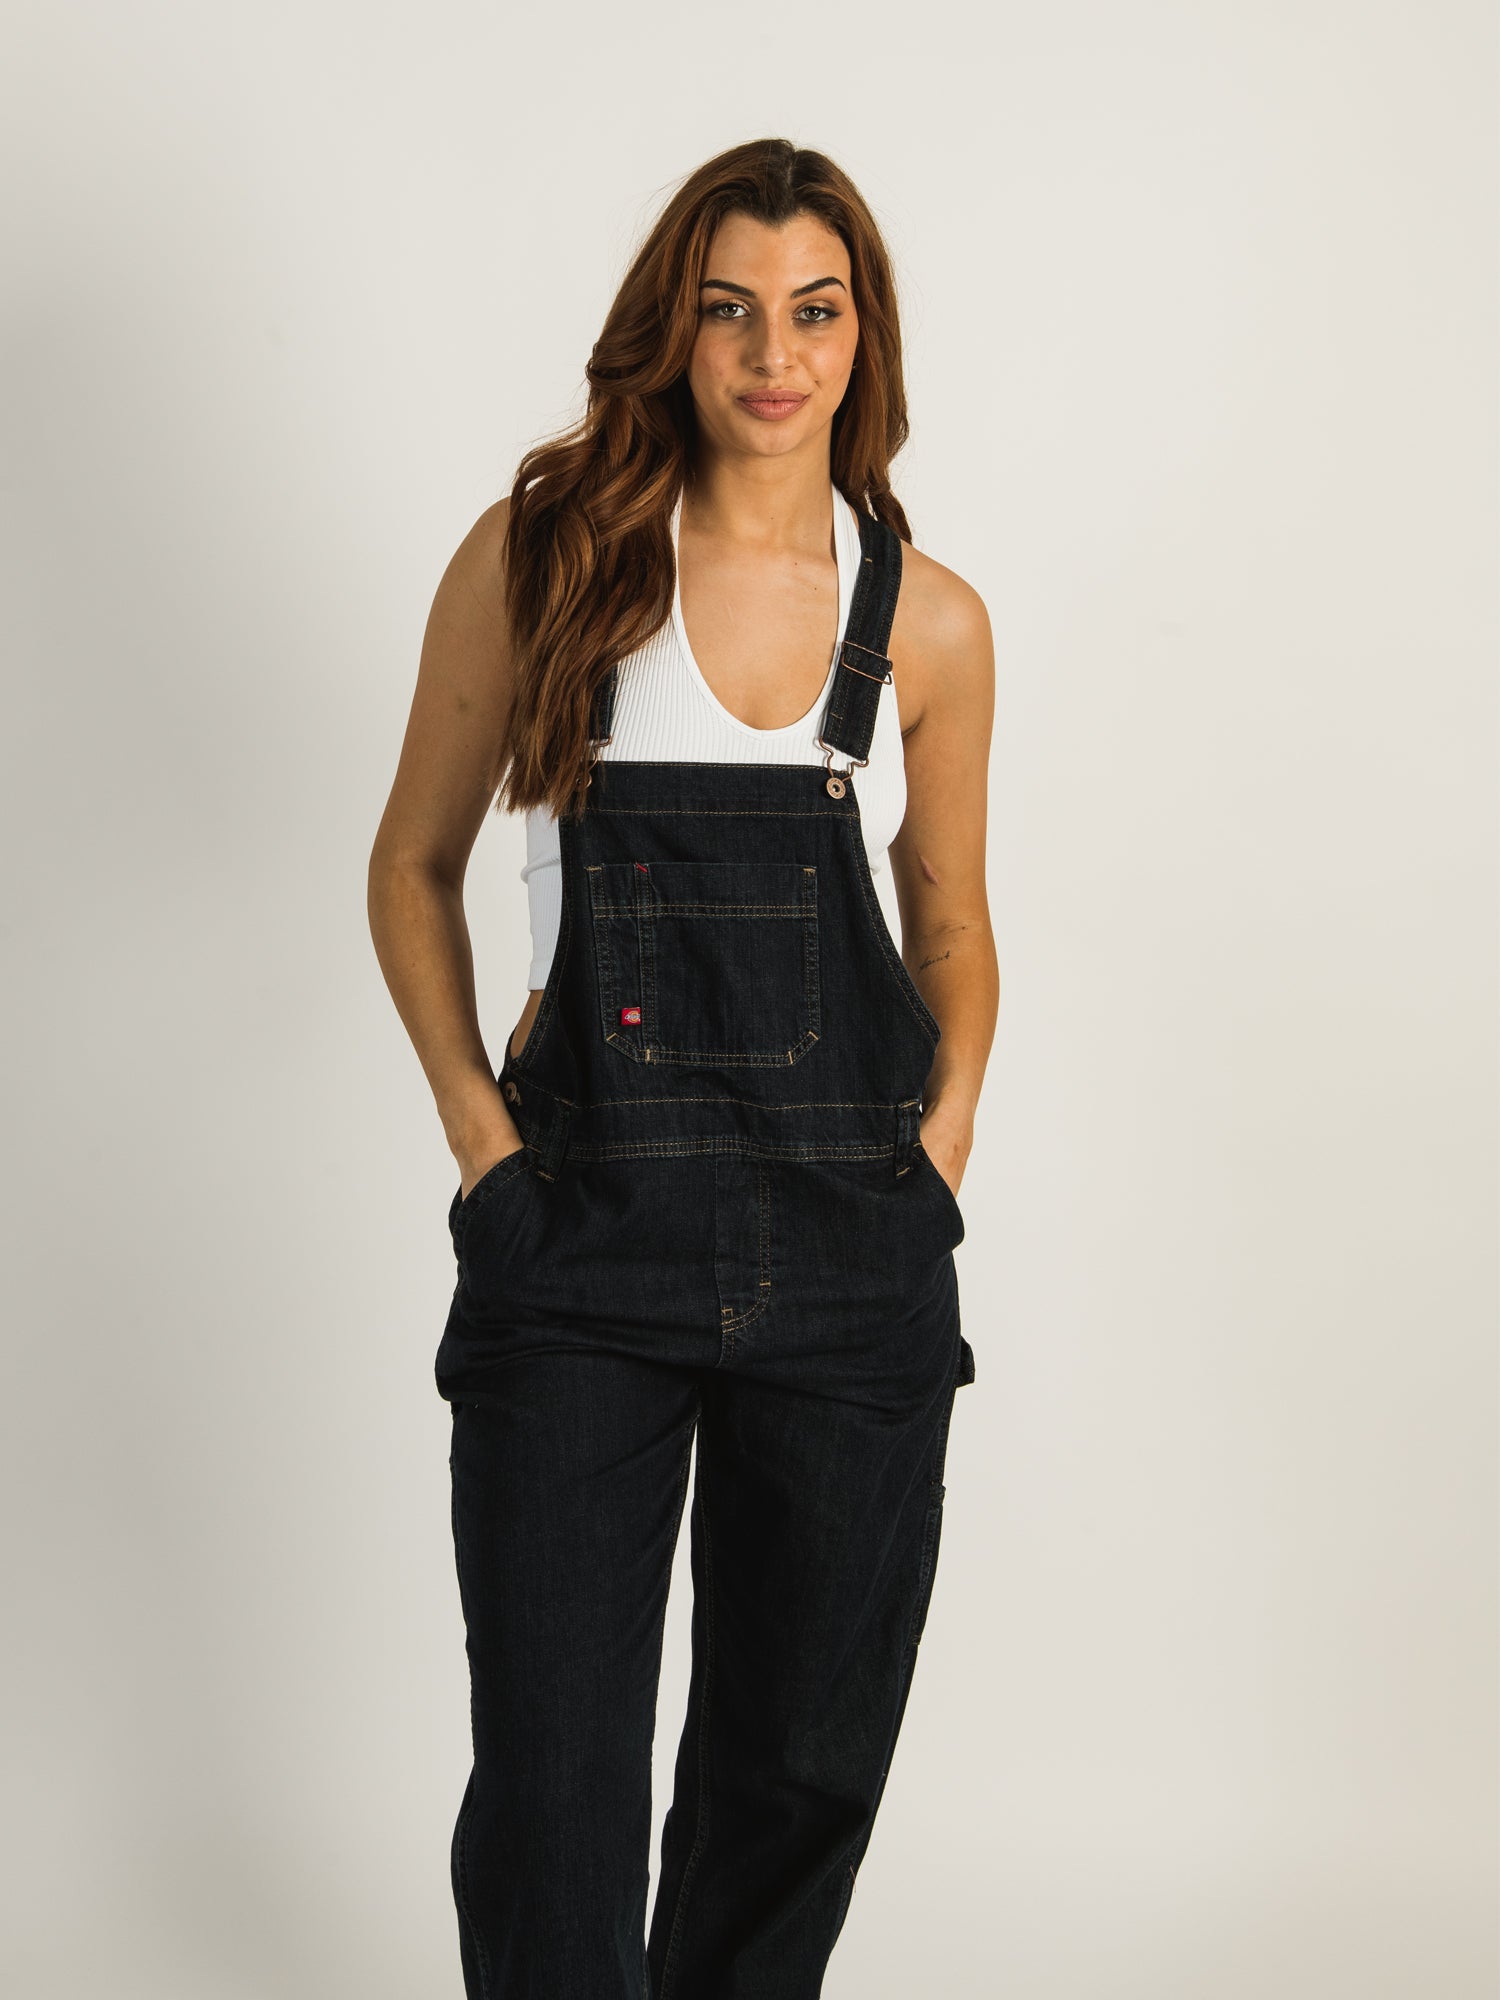 Dickies Relaxed Fit Women's Denim Overalls in 2023 | Fit women, Denim  overalls, Clothes design